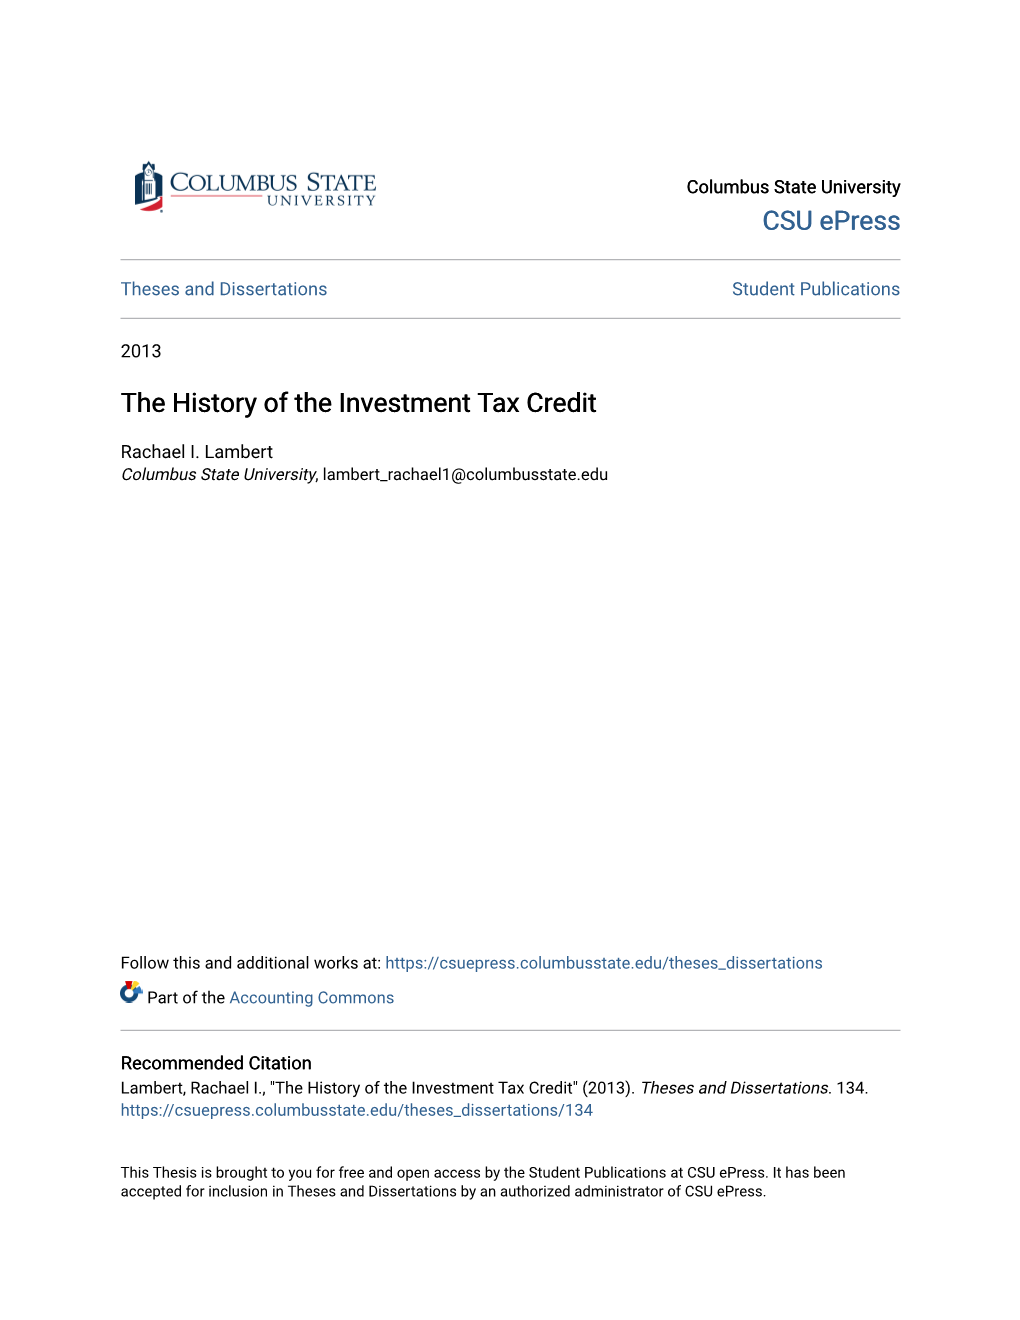 The History of the Investment Tax Credit